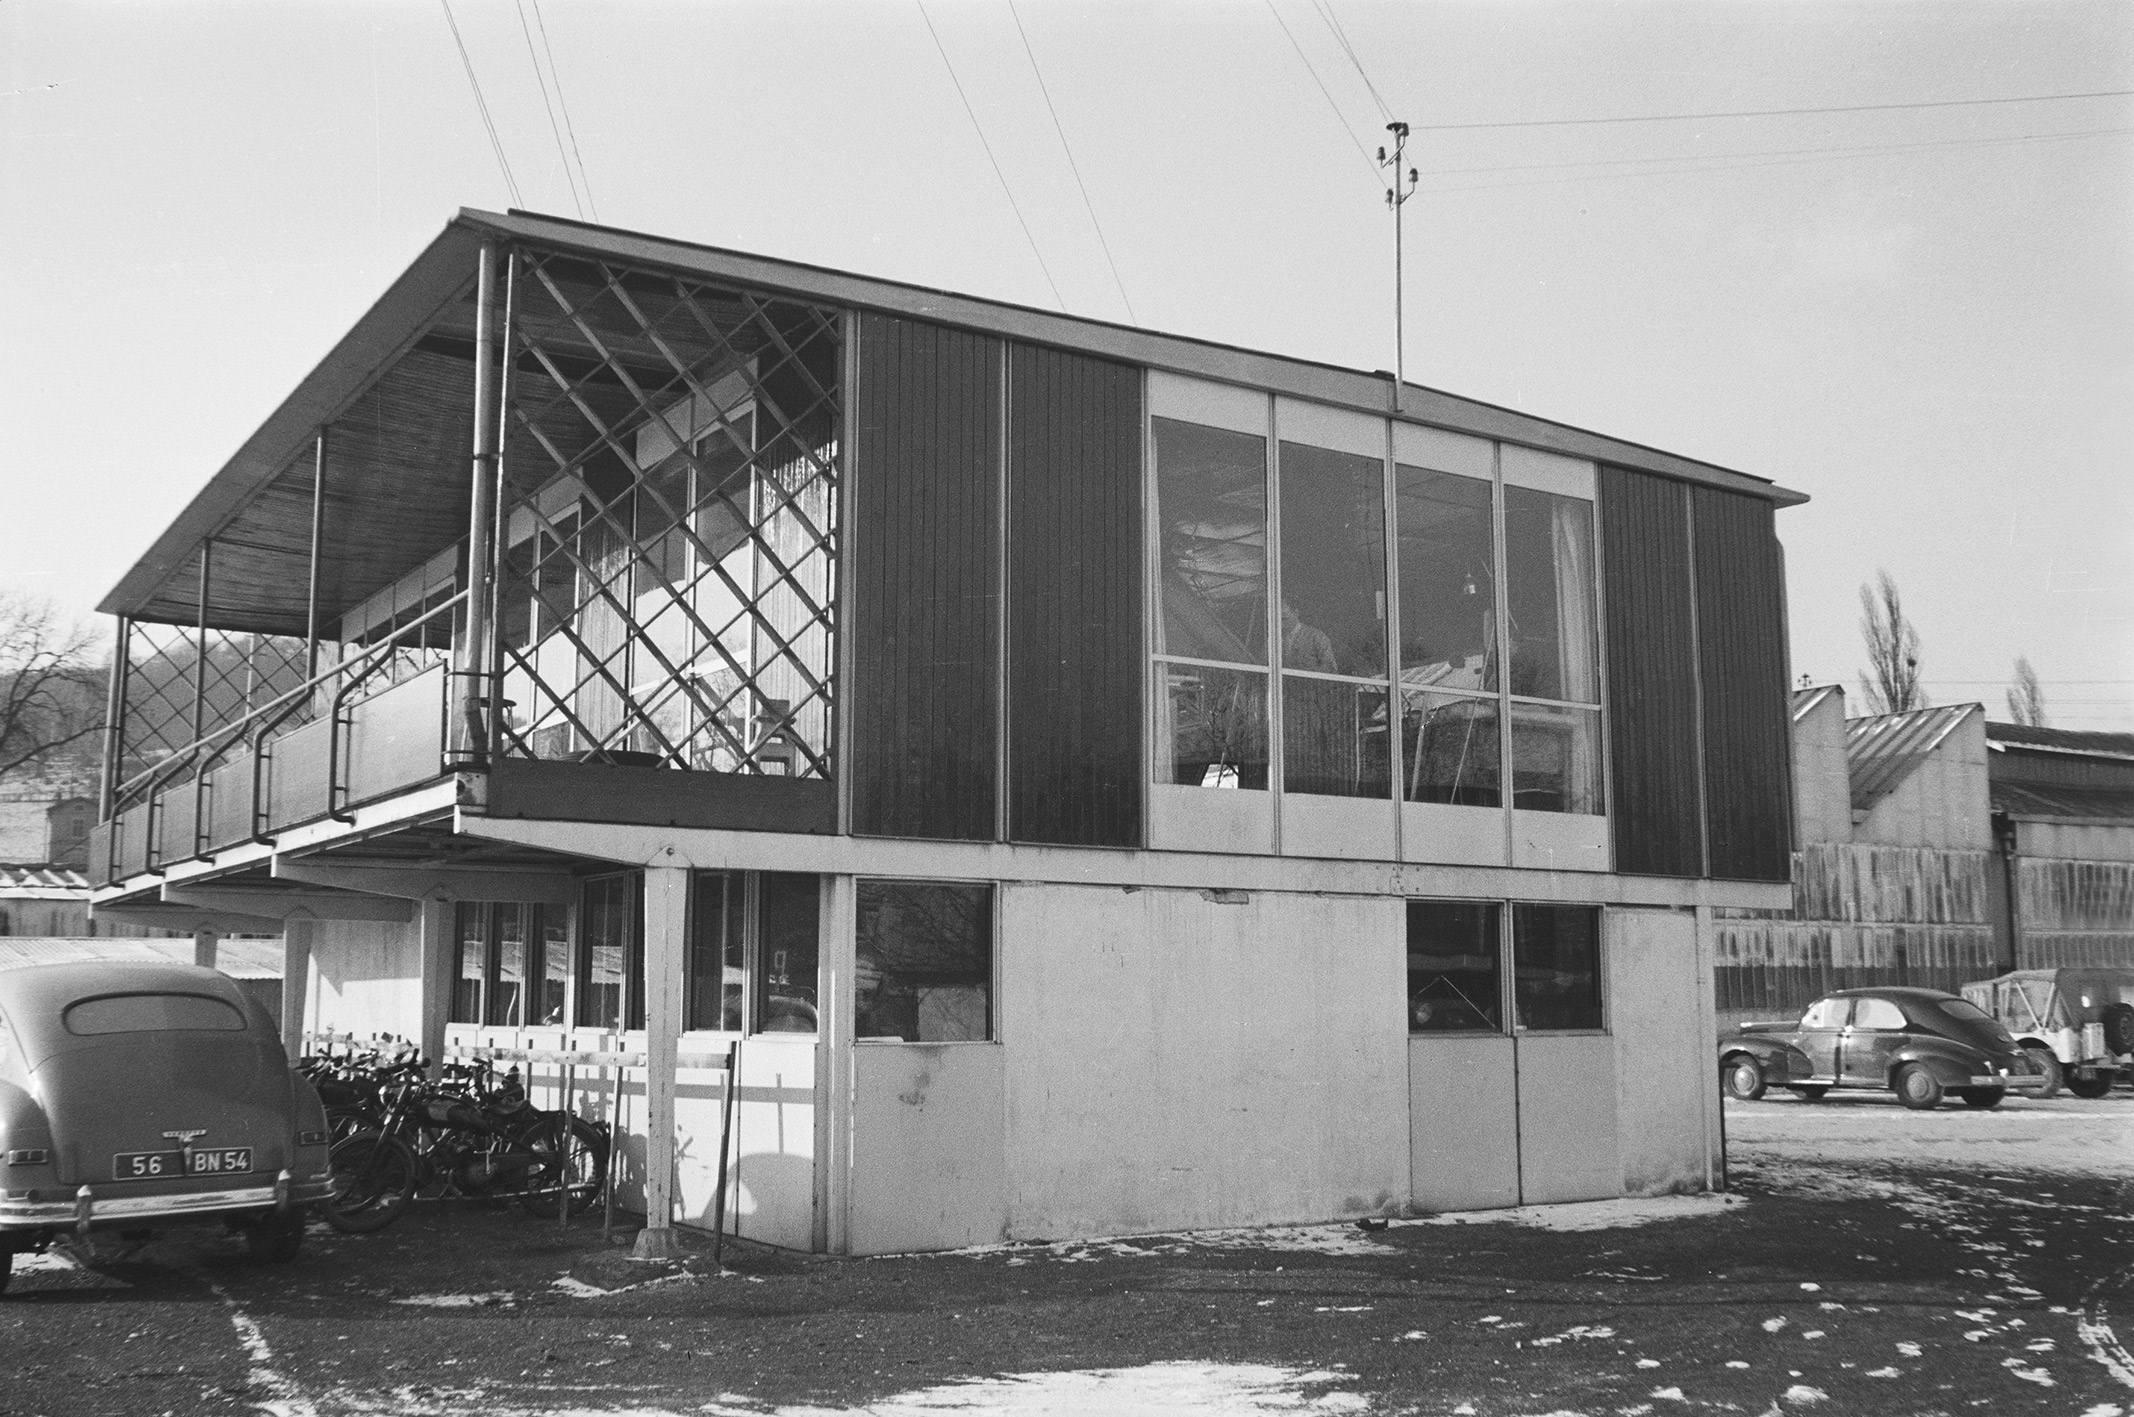 Ateliers Jean Prouvé design office, Maxéville, 1952. View of the facade with the winter garden.